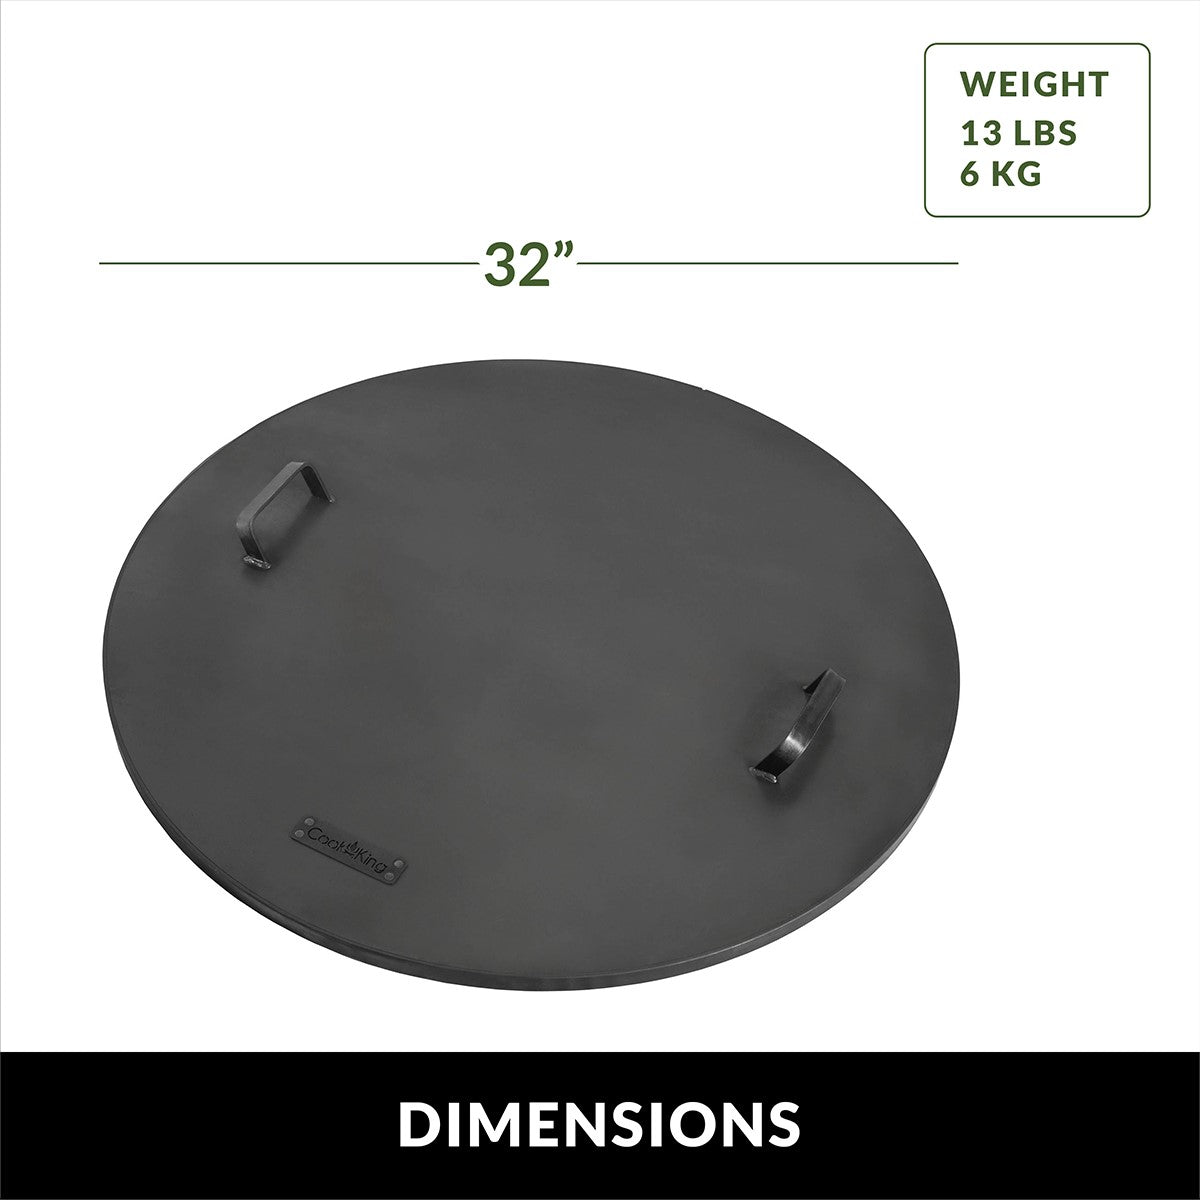 Fire Pit Round Cover Lid, 2mm Thickness, Fire Snuffer in Powder Coated Finish Rust Resistant, Drop-in Burner Fire Pit Pan Lid, Grill Fire Ring Lid with Handle, 32” inch Diameter - Good Directions